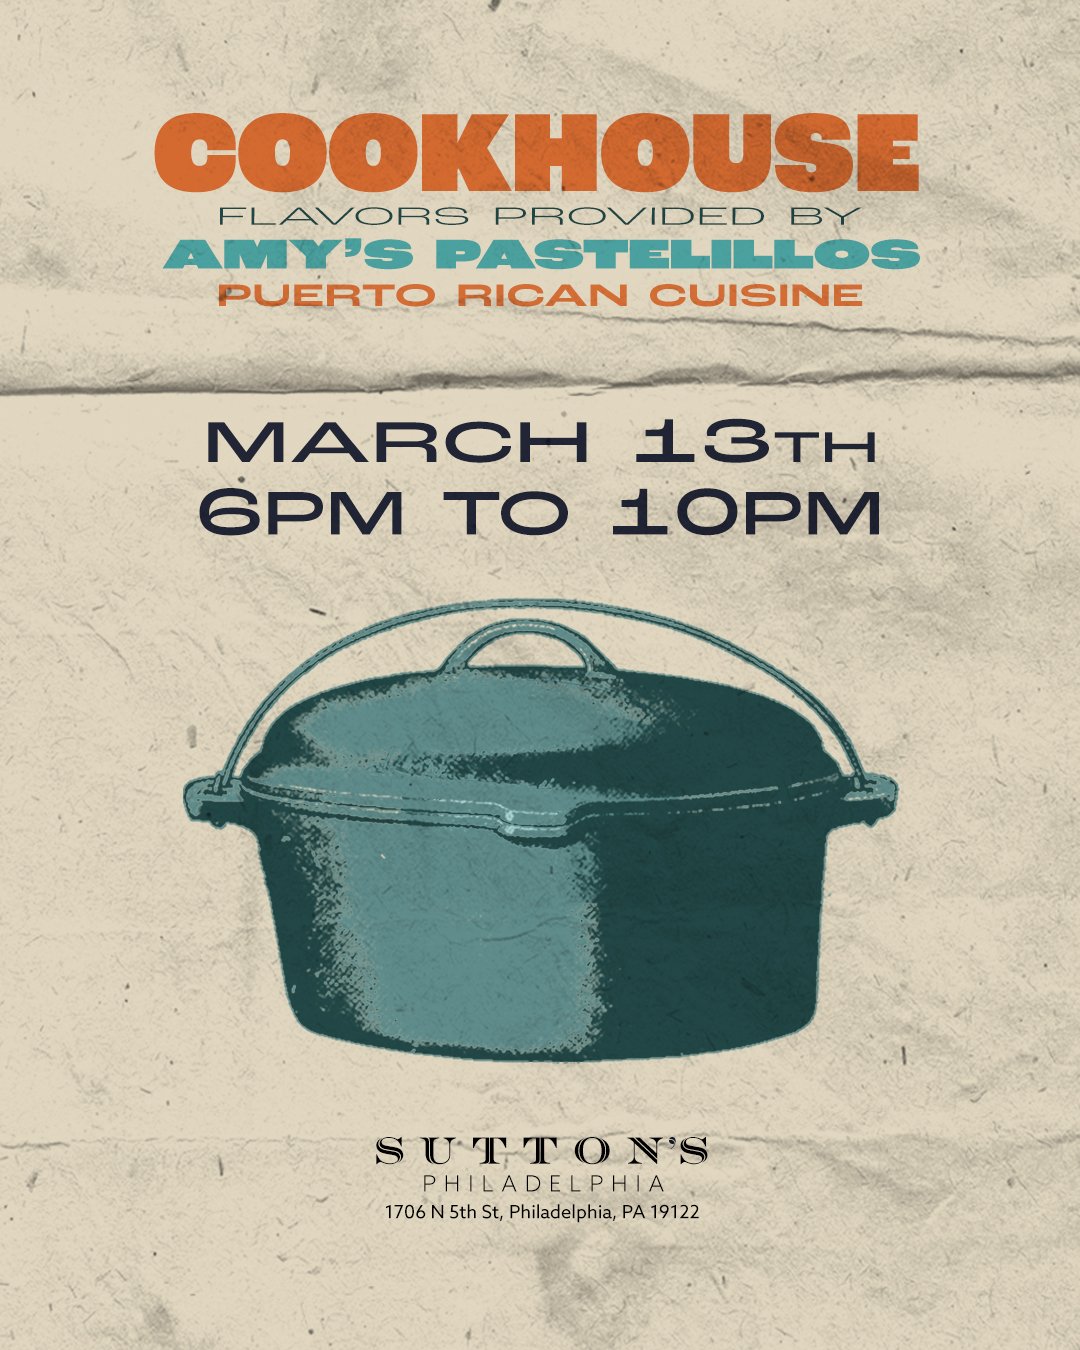 Cookhouse - Suttons - March 13th - igfeed.jpg